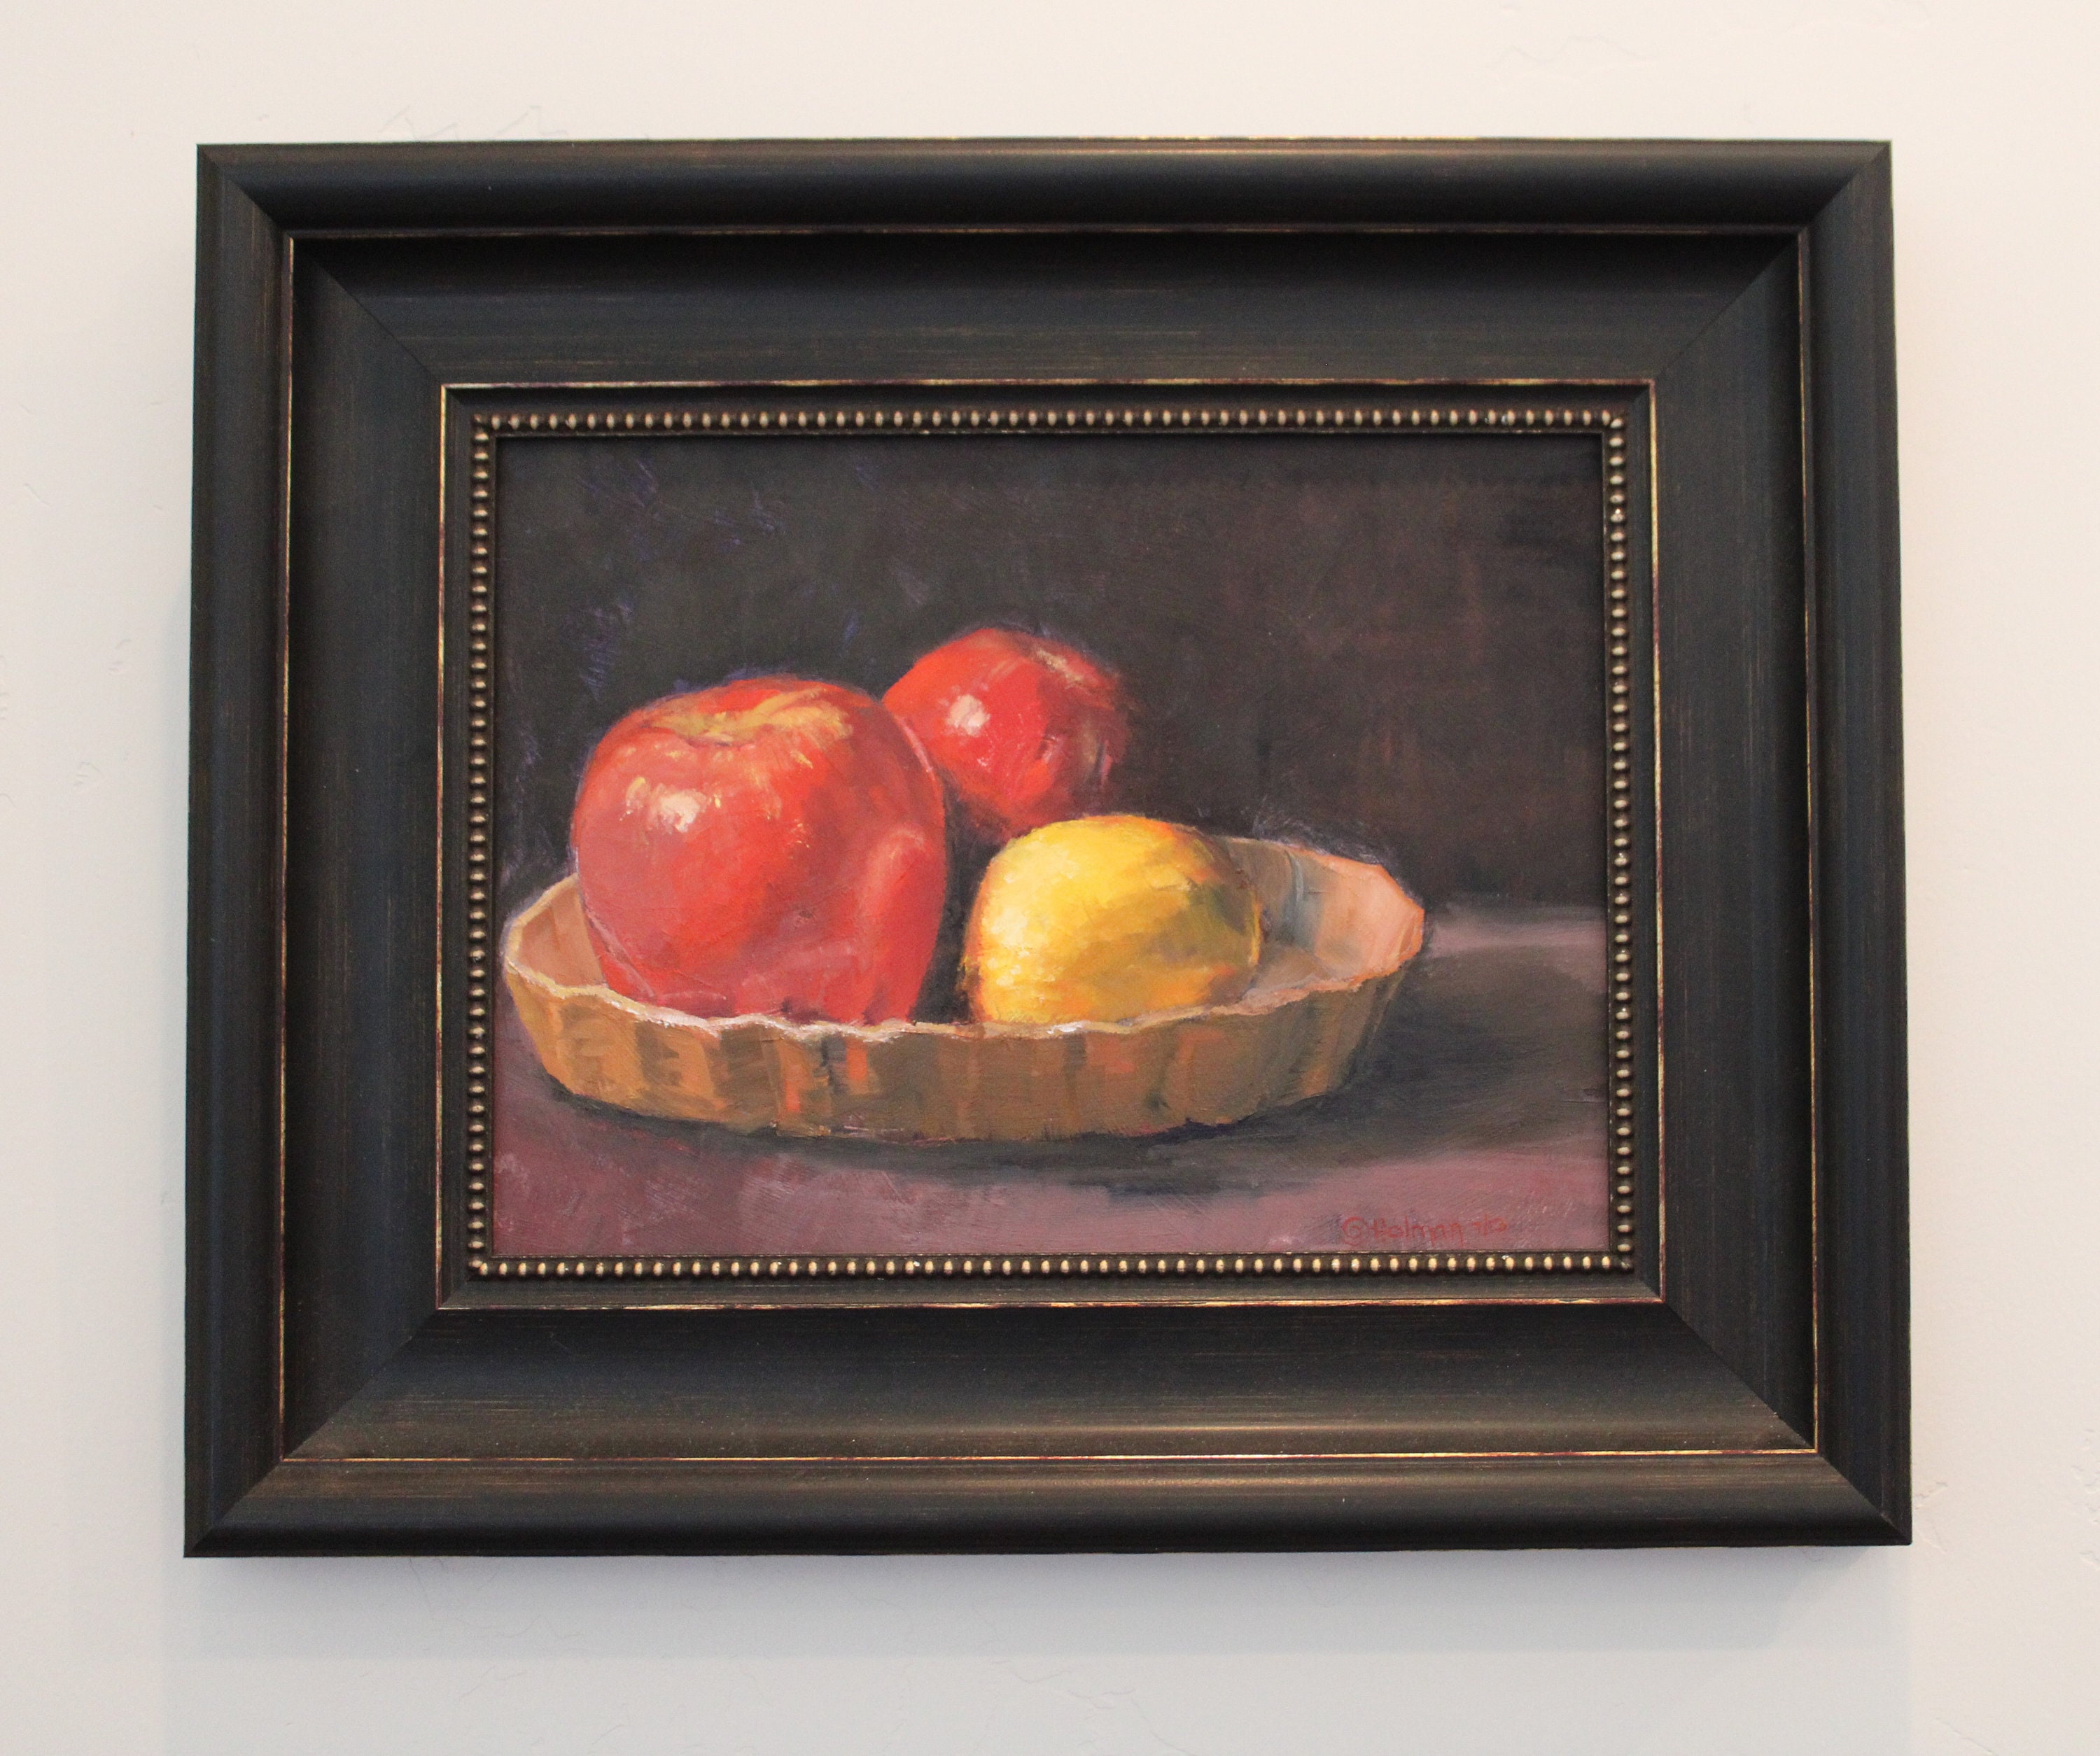 Apples and a Lemon Kitchen Wall Art Framed Wall Decor Original Oil Painting